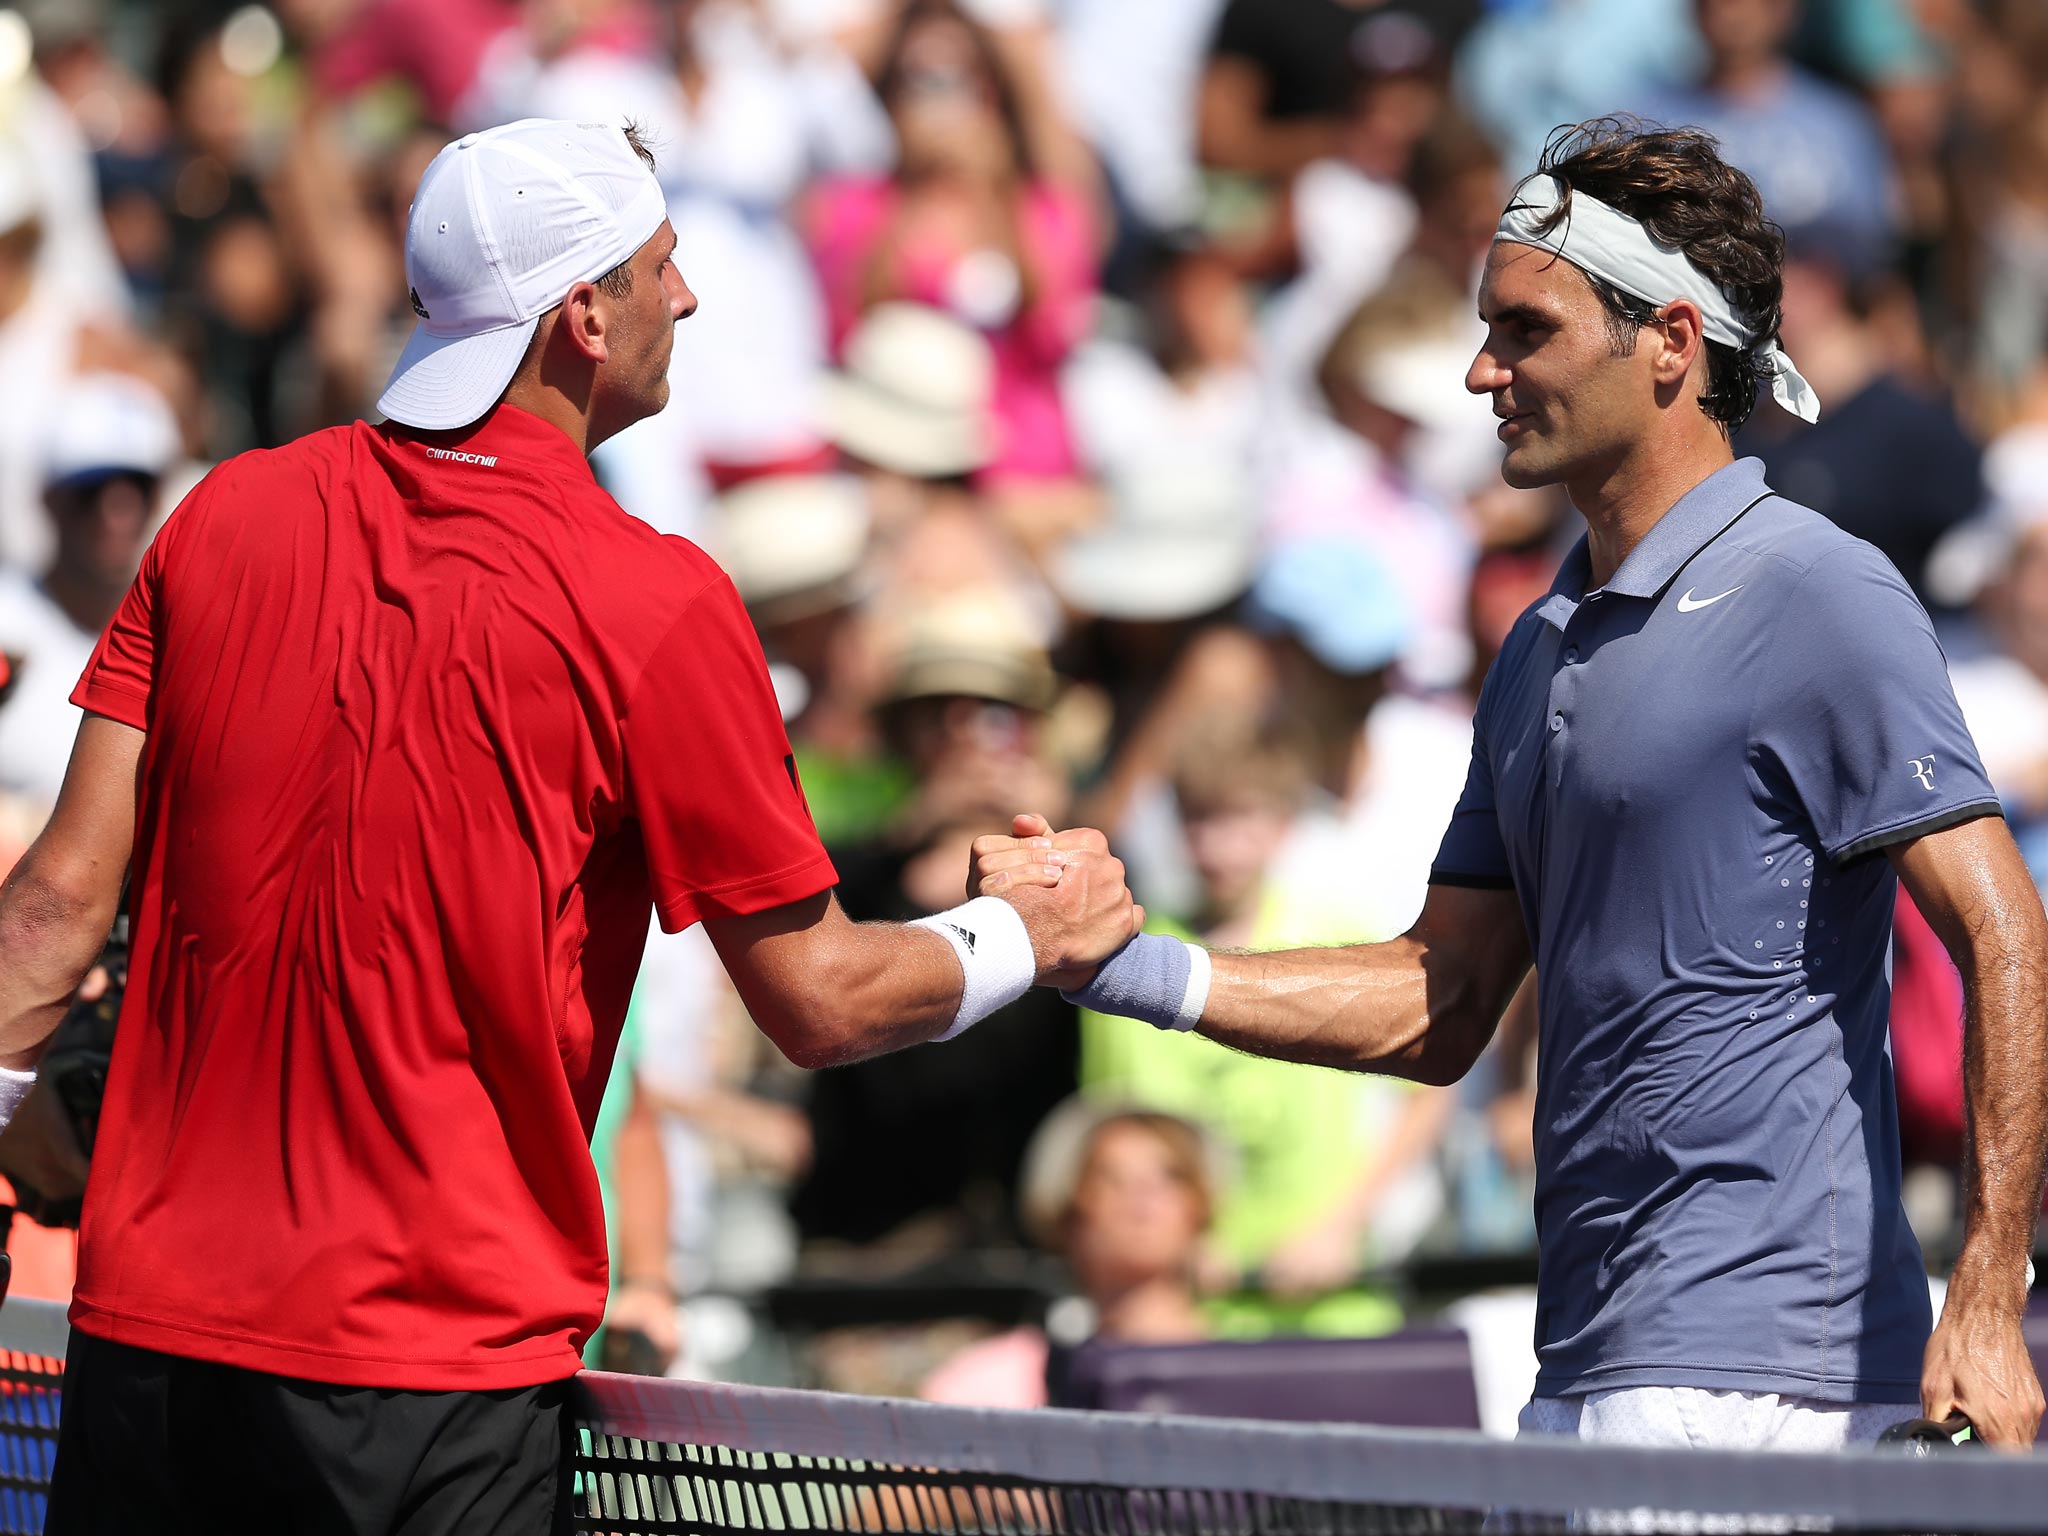 Roger Federer shakes hands with Thiemo de Bakker after beating him 6-3 6-3 in Miami